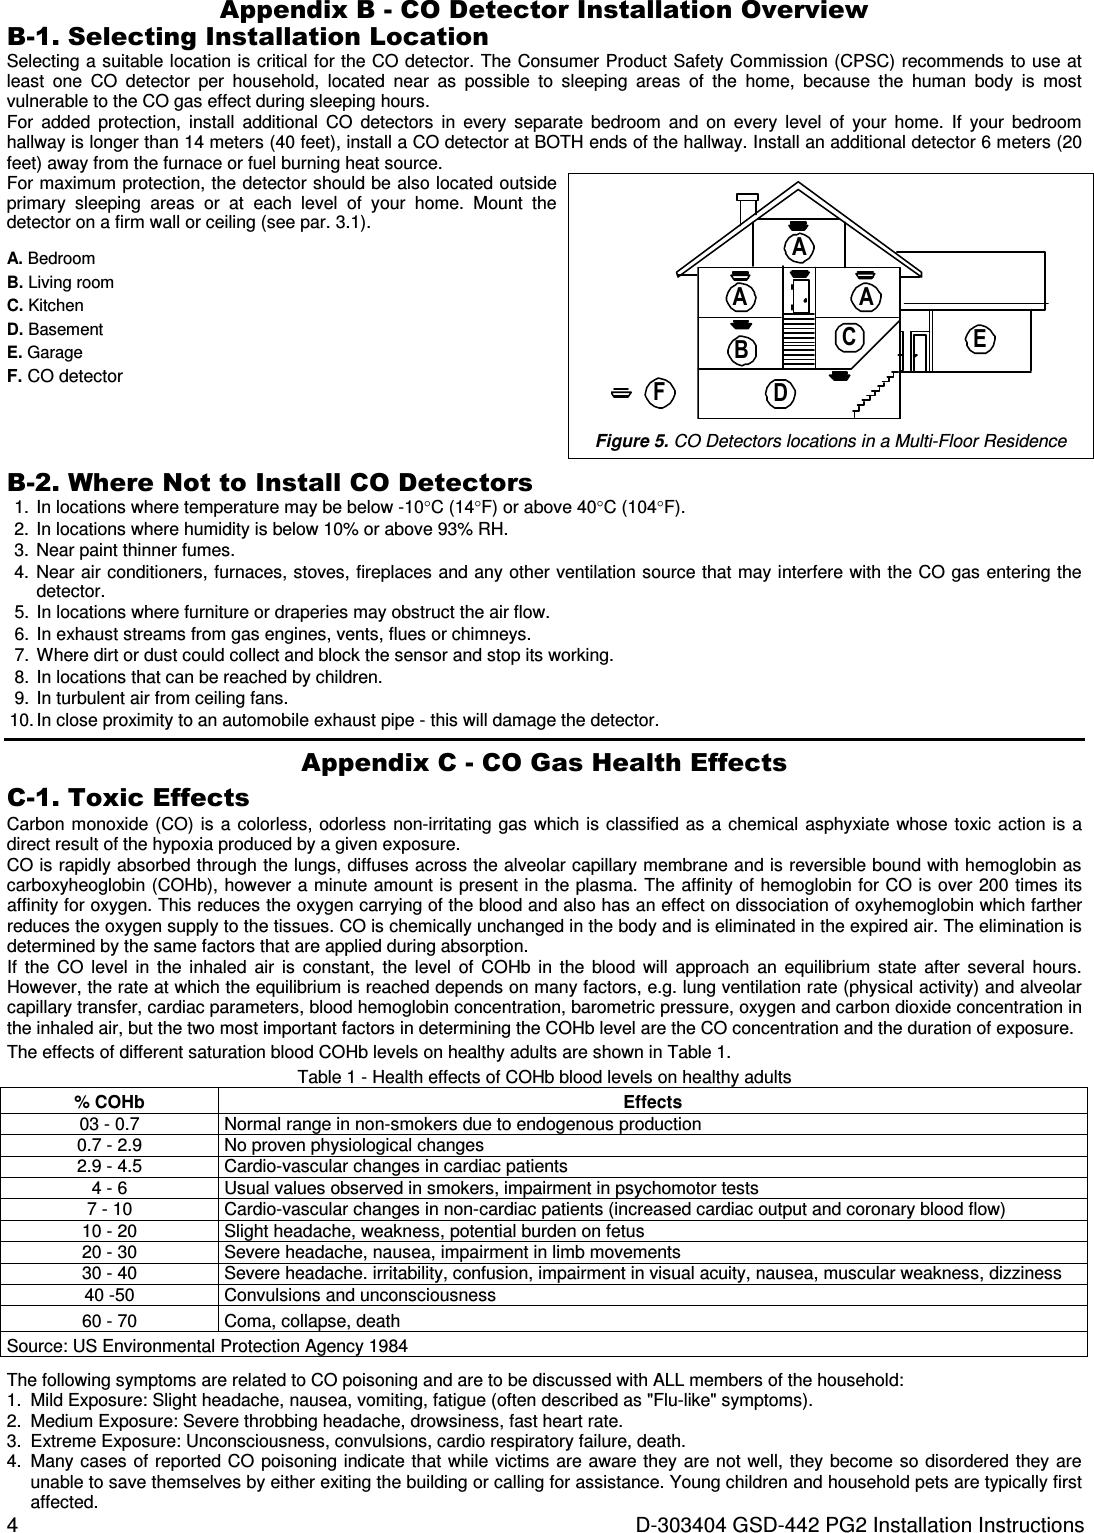 4  D-303404 GSD-442 PG2 Installation Instructions Appendix B - CO Detector Installation Overview B-1. Selecting Installation Location Selecting a suitable location is critical for the CO detector. The Consumer Product Safety Commission (CPSC) recommends to use at least  one  CO  detector  per  household,  located  near  as  possible  to  sleeping  areas  of  the  home,  because  the  human  body  is  most vulnerable to the CO gas effect during sleeping hours.  For  added  protection,  install  additional  CO  detectors  in  every  separate  bedroom  and  on  every  level  of  your  home.  If  your  bedroom hallway is longer than 14 meters (40 feet), install a CO detector at BOTH ends of the hallway. Install an additional detector 6 meters (20 feet) away from the furnace or fuel burning heat source. For maximum protection, the detector should be also located outside primary  sleeping  areas  or  at  each  level  of  your  home.  Mount  the detector on a firm wall or ceiling (see par. 3.1). A. Bedroom B. Living room C. Kitchen D. Basement E. Garage F. CO detector BCDAEA AF Figure 5. CO Detectors locations in a Multi-Floor Residence B-2. Where Not to Install CO Detectors 1. In locations where temperature may be below -10°C (14°F) or above 40°C (104°F). 2. In locations where humidity is below 10% or above 93% RH. 3. Near paint thinner fumes. 4. Near air conditioners, furnaces, stoves, fireplaces and any other ventilation source that may interfere with the CO gas entering the detector. 5. In locations where furniture or draperies may obstruct the air flow. 6. In exhaust streams from gas engines, vents, flues or chimneys. 7. Where dirt or dust could collect and block the sensor and stop its working. 8. In locations that can be reached by children. 9. In turbulent air from ceiling fans. 10. In close proximity to an automobile exhaust pipe - this will damage the detector. Appendix C - CO Gas Health Effects C-1. Toxic Effects Carbon monoxide (CO) is a colorless, odorless non-irritating gas which is classified as a chemical asphyxiate whose toxic action is a direct result of the hypoxia produced by a given exposure. CO is rapidly absorbed through the lungs, diffuses across the alveolar capillary membrane and is reversible bound with hemoglobin as carboxyheoglobin (COHb), however a minute amount is present in the plasma. The affinity of hemoglobin for CO is over 200 times its affinity for oxygen. This reduces the oxygen carrying of the blood and also has an effect on dissociation of oxyhemoglobin which farther reduces the oxygen supply to the tissues. CO is chemically unchanged in the body and is eliminated in the expired air. The elimination is determined by the same factors that are applied during absorption. If  the  CO  level  in  the  inhaled  air  is  constant,  the  level  of  COHb in  the  blood  will  approach  an  equilibrium  state  after  several  hours. However, the rate at which the equilibrium is reached depends on many factors, e.g. lung ventilation rate (physical activity) and alveolar capillary transfer, cardiac parameters, blood hemoglobin concentration, barometric pressure, oxygen and carbon dioxide concentration in the inhaled air, but the two most important factors in determining the COHb level are the CO concentration and the duration of exposure.  The effects of different saturation blood COHb levels on healthy adults are shown in Table 1. Table 1 - Health effects of COHb blood levels on healthy adults % COHb Effects 03 - 0.7 Normal range in non-smokers due to endogenous production 0.7 - 2.9 No proven physiological changes 2.9 - 4.5 Cardio-vascular changes in cardiac patients 4 - 6 Usual values observed in smokers, impairment in psychomotor tests 7 - 10 Cardio-vascular changes in non-cardiac patients (increased cardiac output and coronary blood flow) 10 - 20 Slight headache, weakness, potential burden on fetus 20 - 30 Severe headache, nausea, impairment in limb movements 30 - 40 Severe headache. irritability, confusion, impairment in visual acuity, nausea, muscular weakness, dizziness 40 -50 Convulsions and unconsciousness 60 - 70 Coma, collapse, death Source: US Environmental Protection Agency 1984 The following symptoms are related to CO poisoning and are to be discussed with ALL members of the household: 1.  Mild Exposure: Slight headache, nausea, vomiting, fatigue (often described as &quot;Flu-like&quot; symptoms). 2.  Medium Exposure: Severe throbbing headache, drowsiness, fast heart rate. 3.  Extreme Exposure: Unconsciousness, convulsions, cardio respiratory failure, death. 4.  Many cases of reported CO poisoning indicate that while victims are aware they are not well, they become so disordered they are unable to save themselves by either exiting the building or calling for assistance. Young children and household pets are typically first affected. 